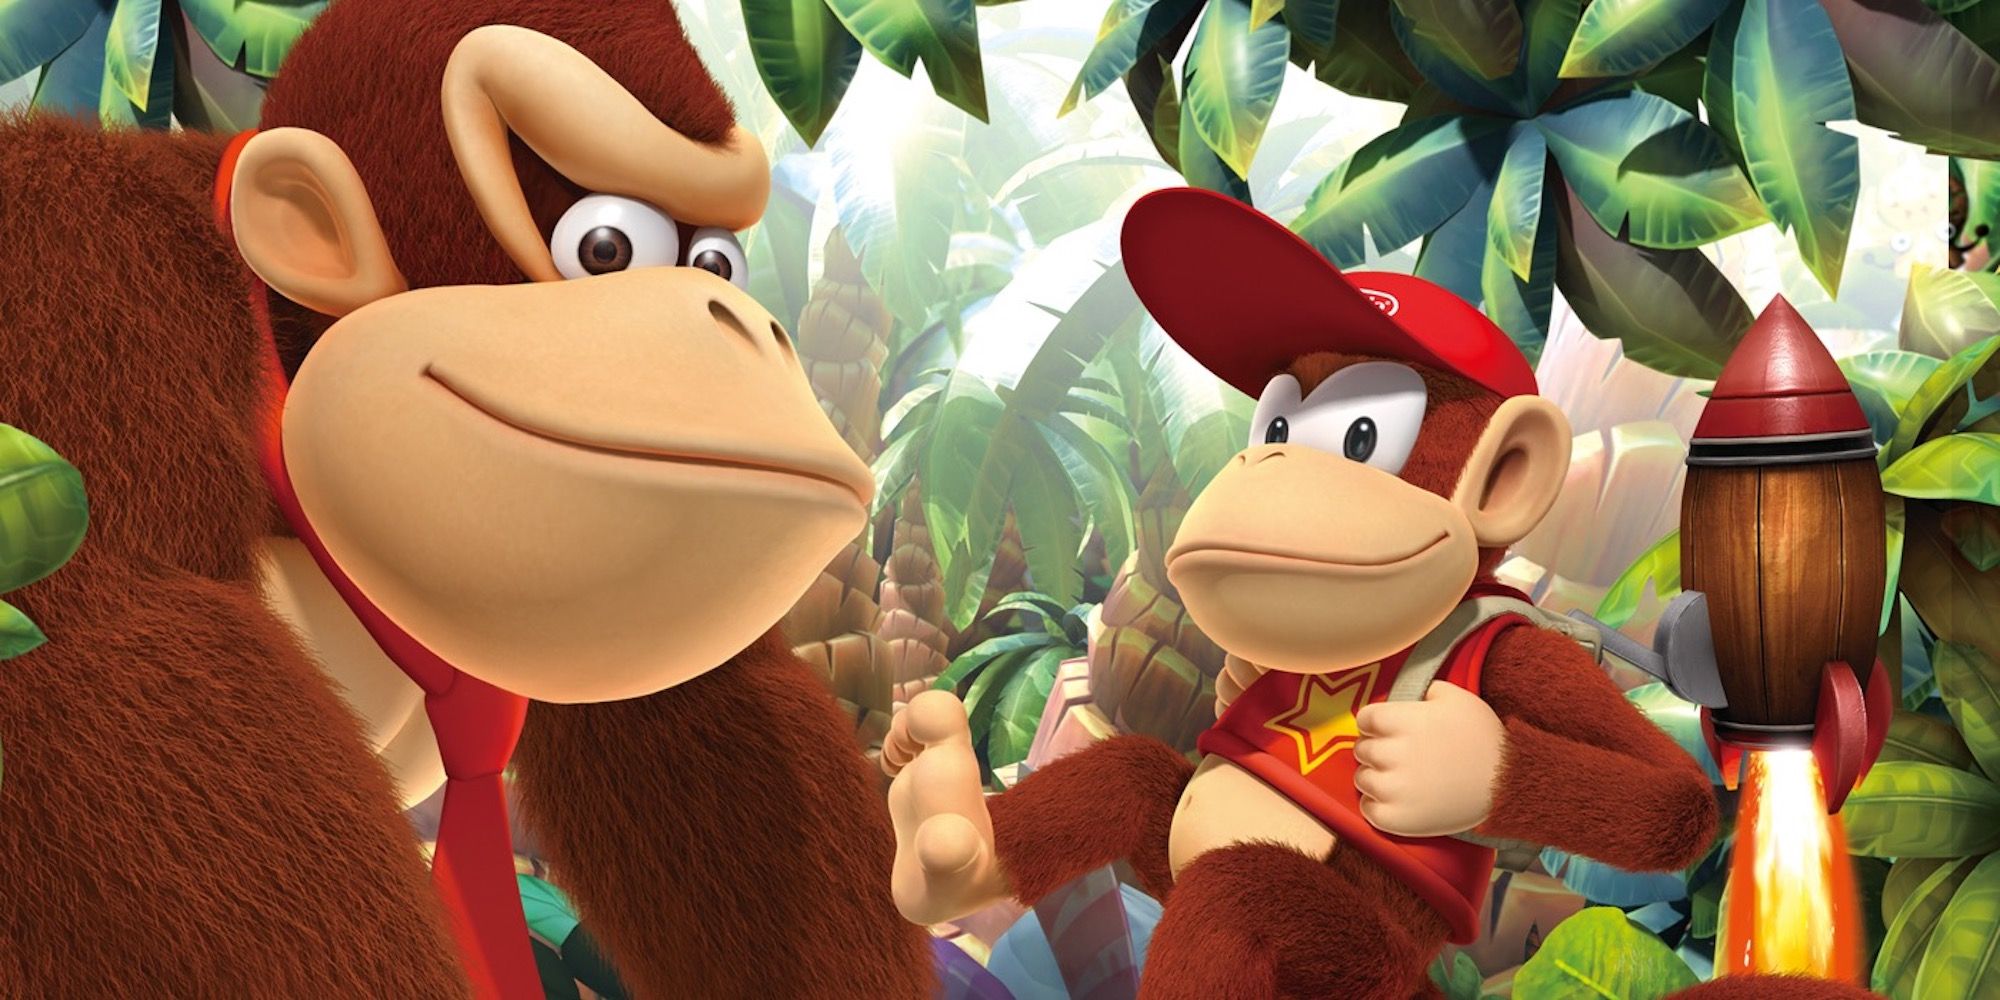 Donkey Kong and Diddy Kong from Donkey Kong Returns